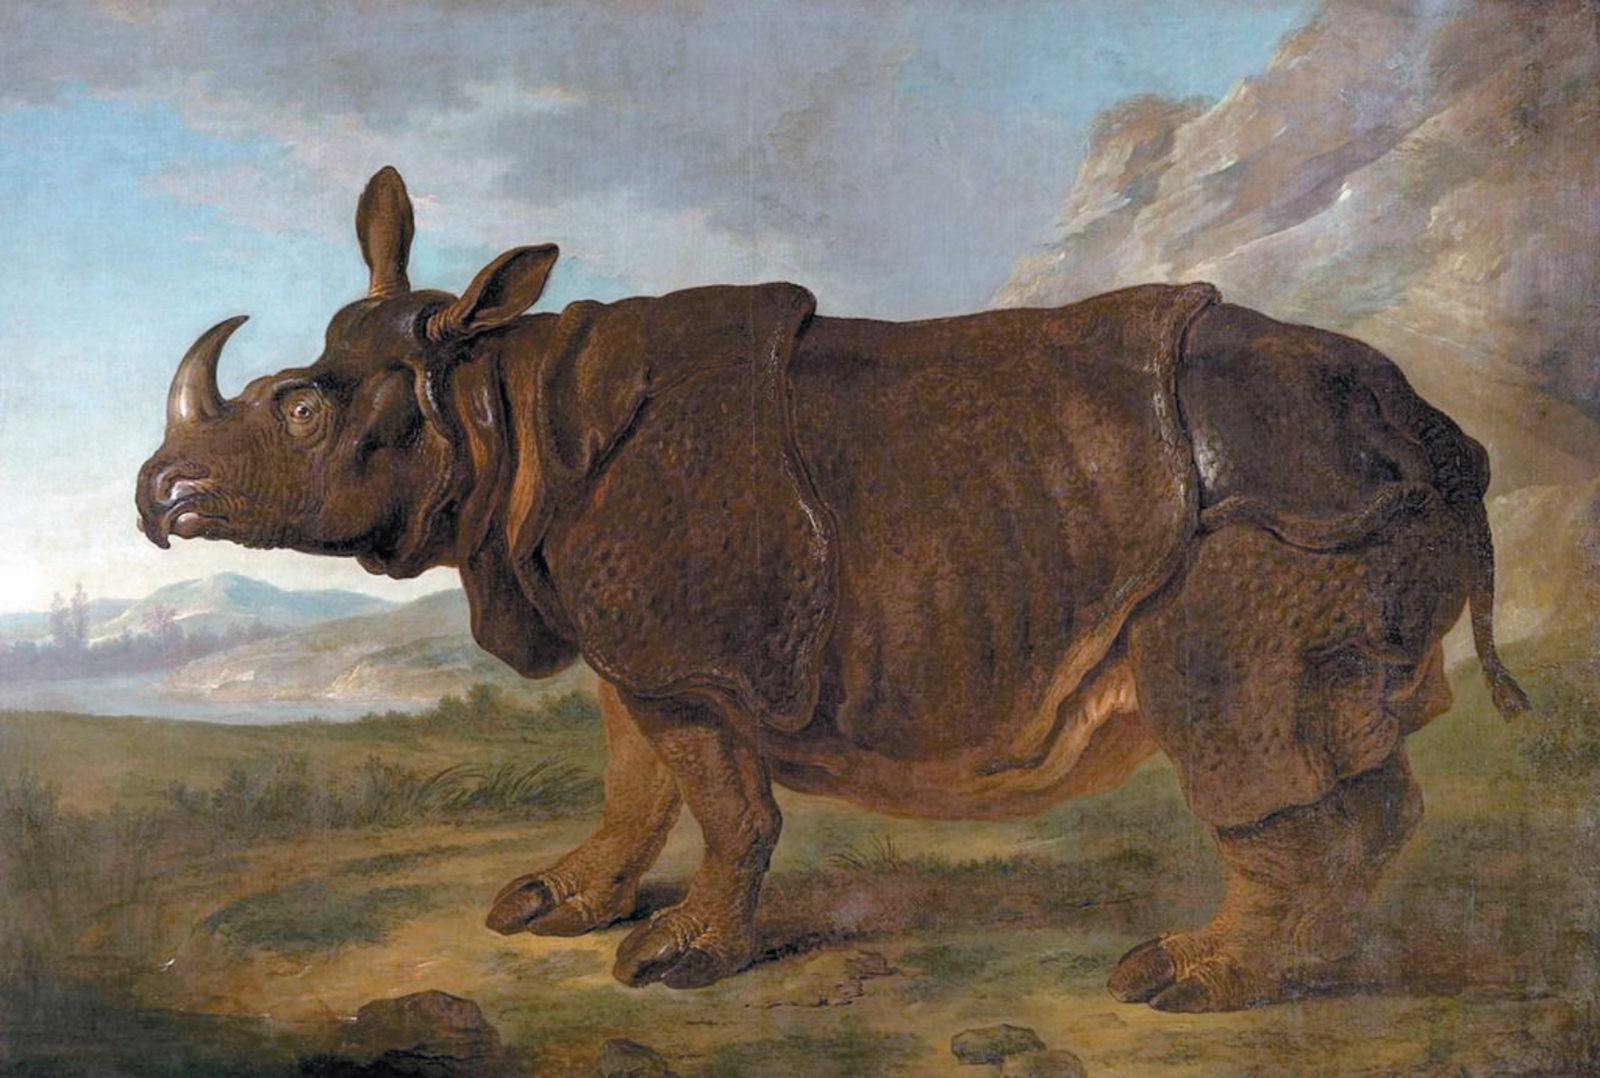 ‘Clara the Rhinoceros’; painting by Jean-Baptiste Oudry, 1749